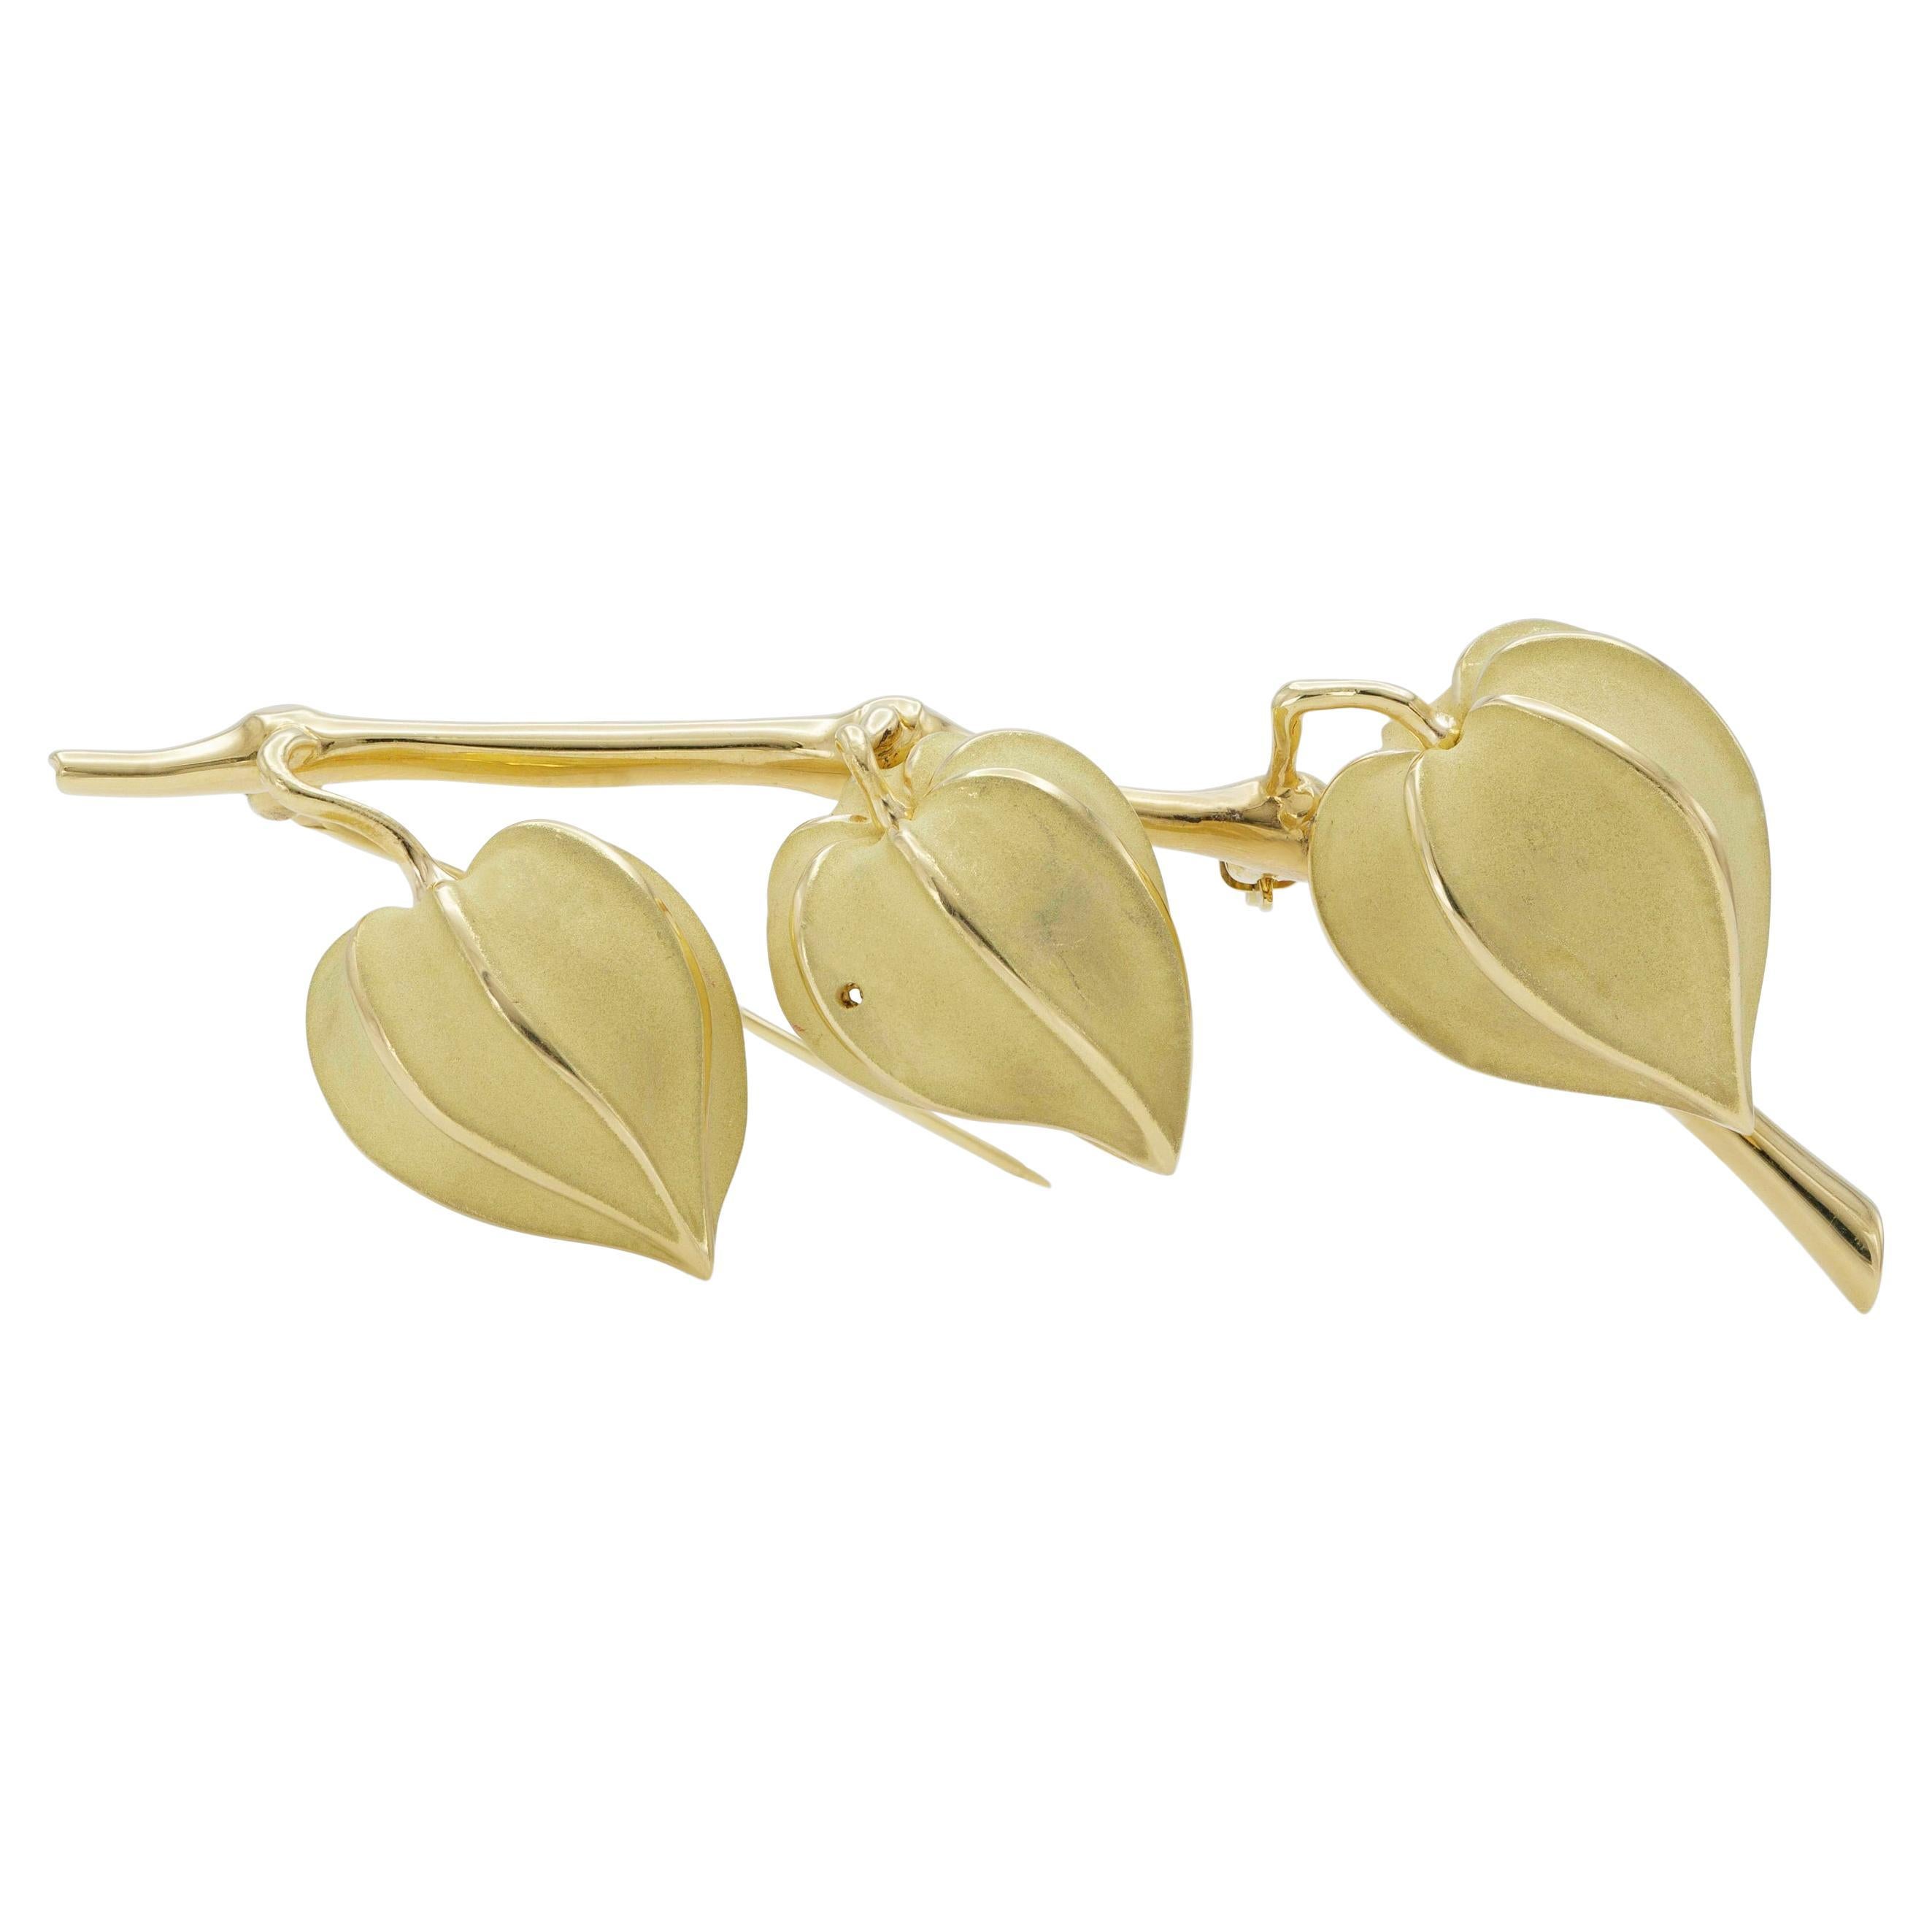 Tiffany & Co. 18K Yellow Gold and Enamel Pin For Sale